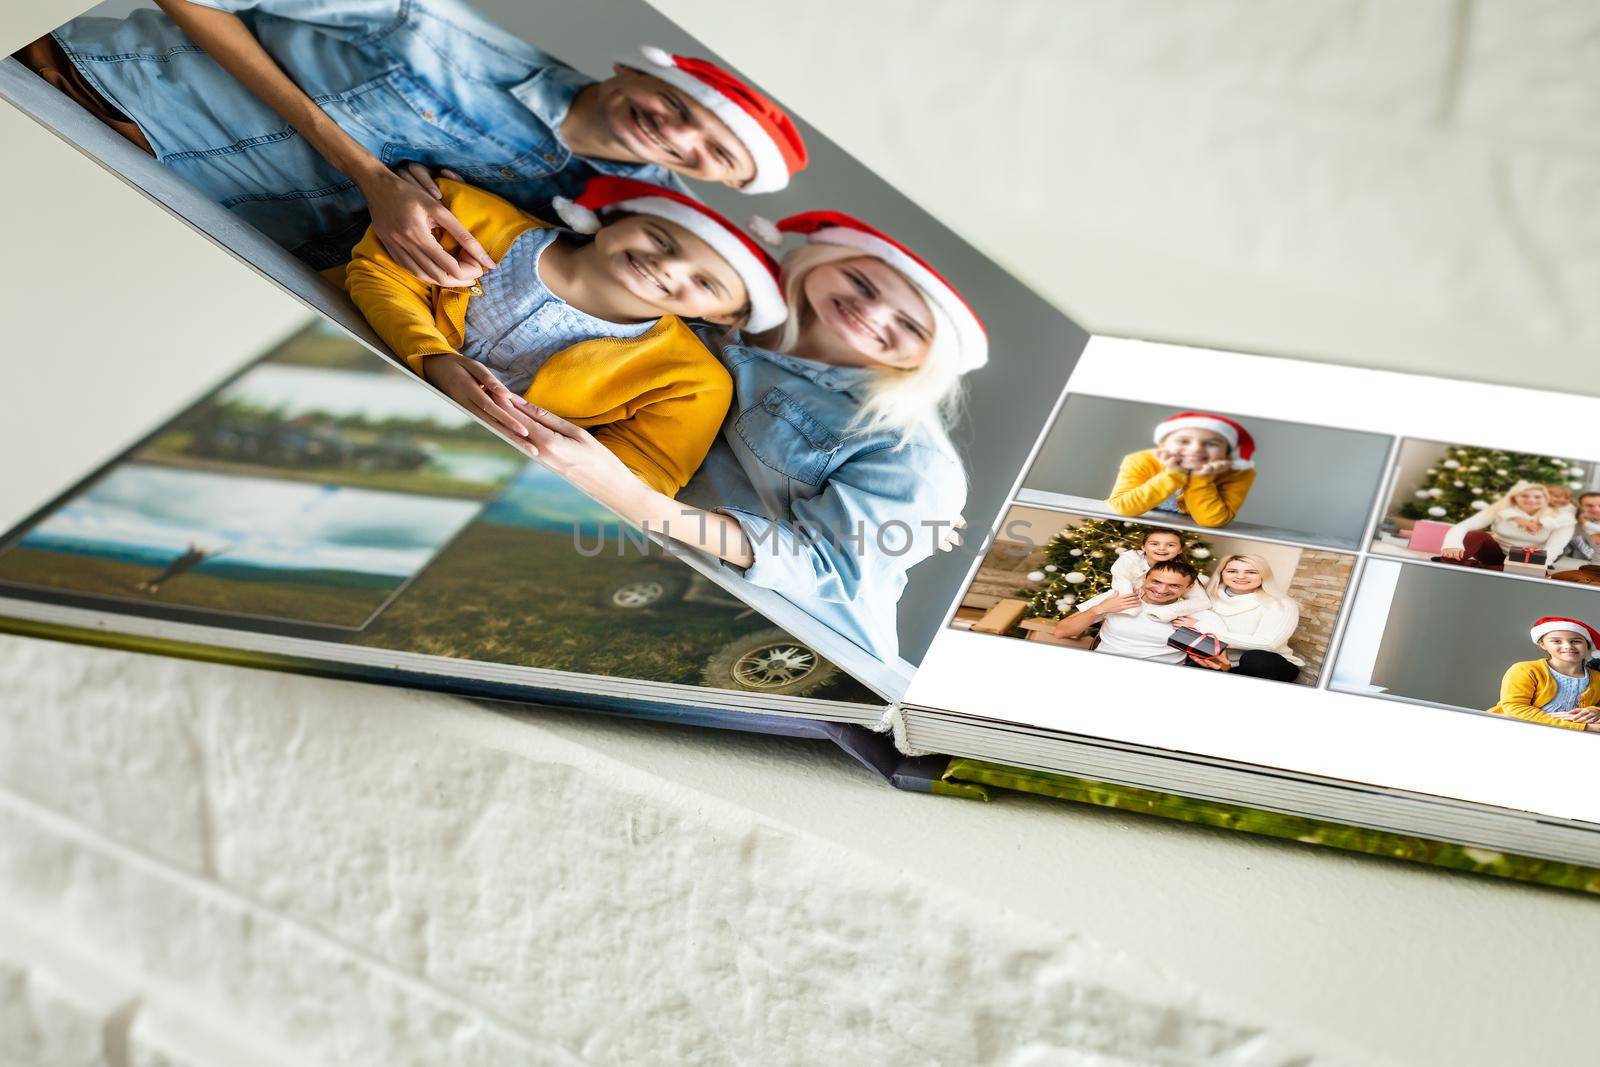 photo book with christmas photos by Andelov13